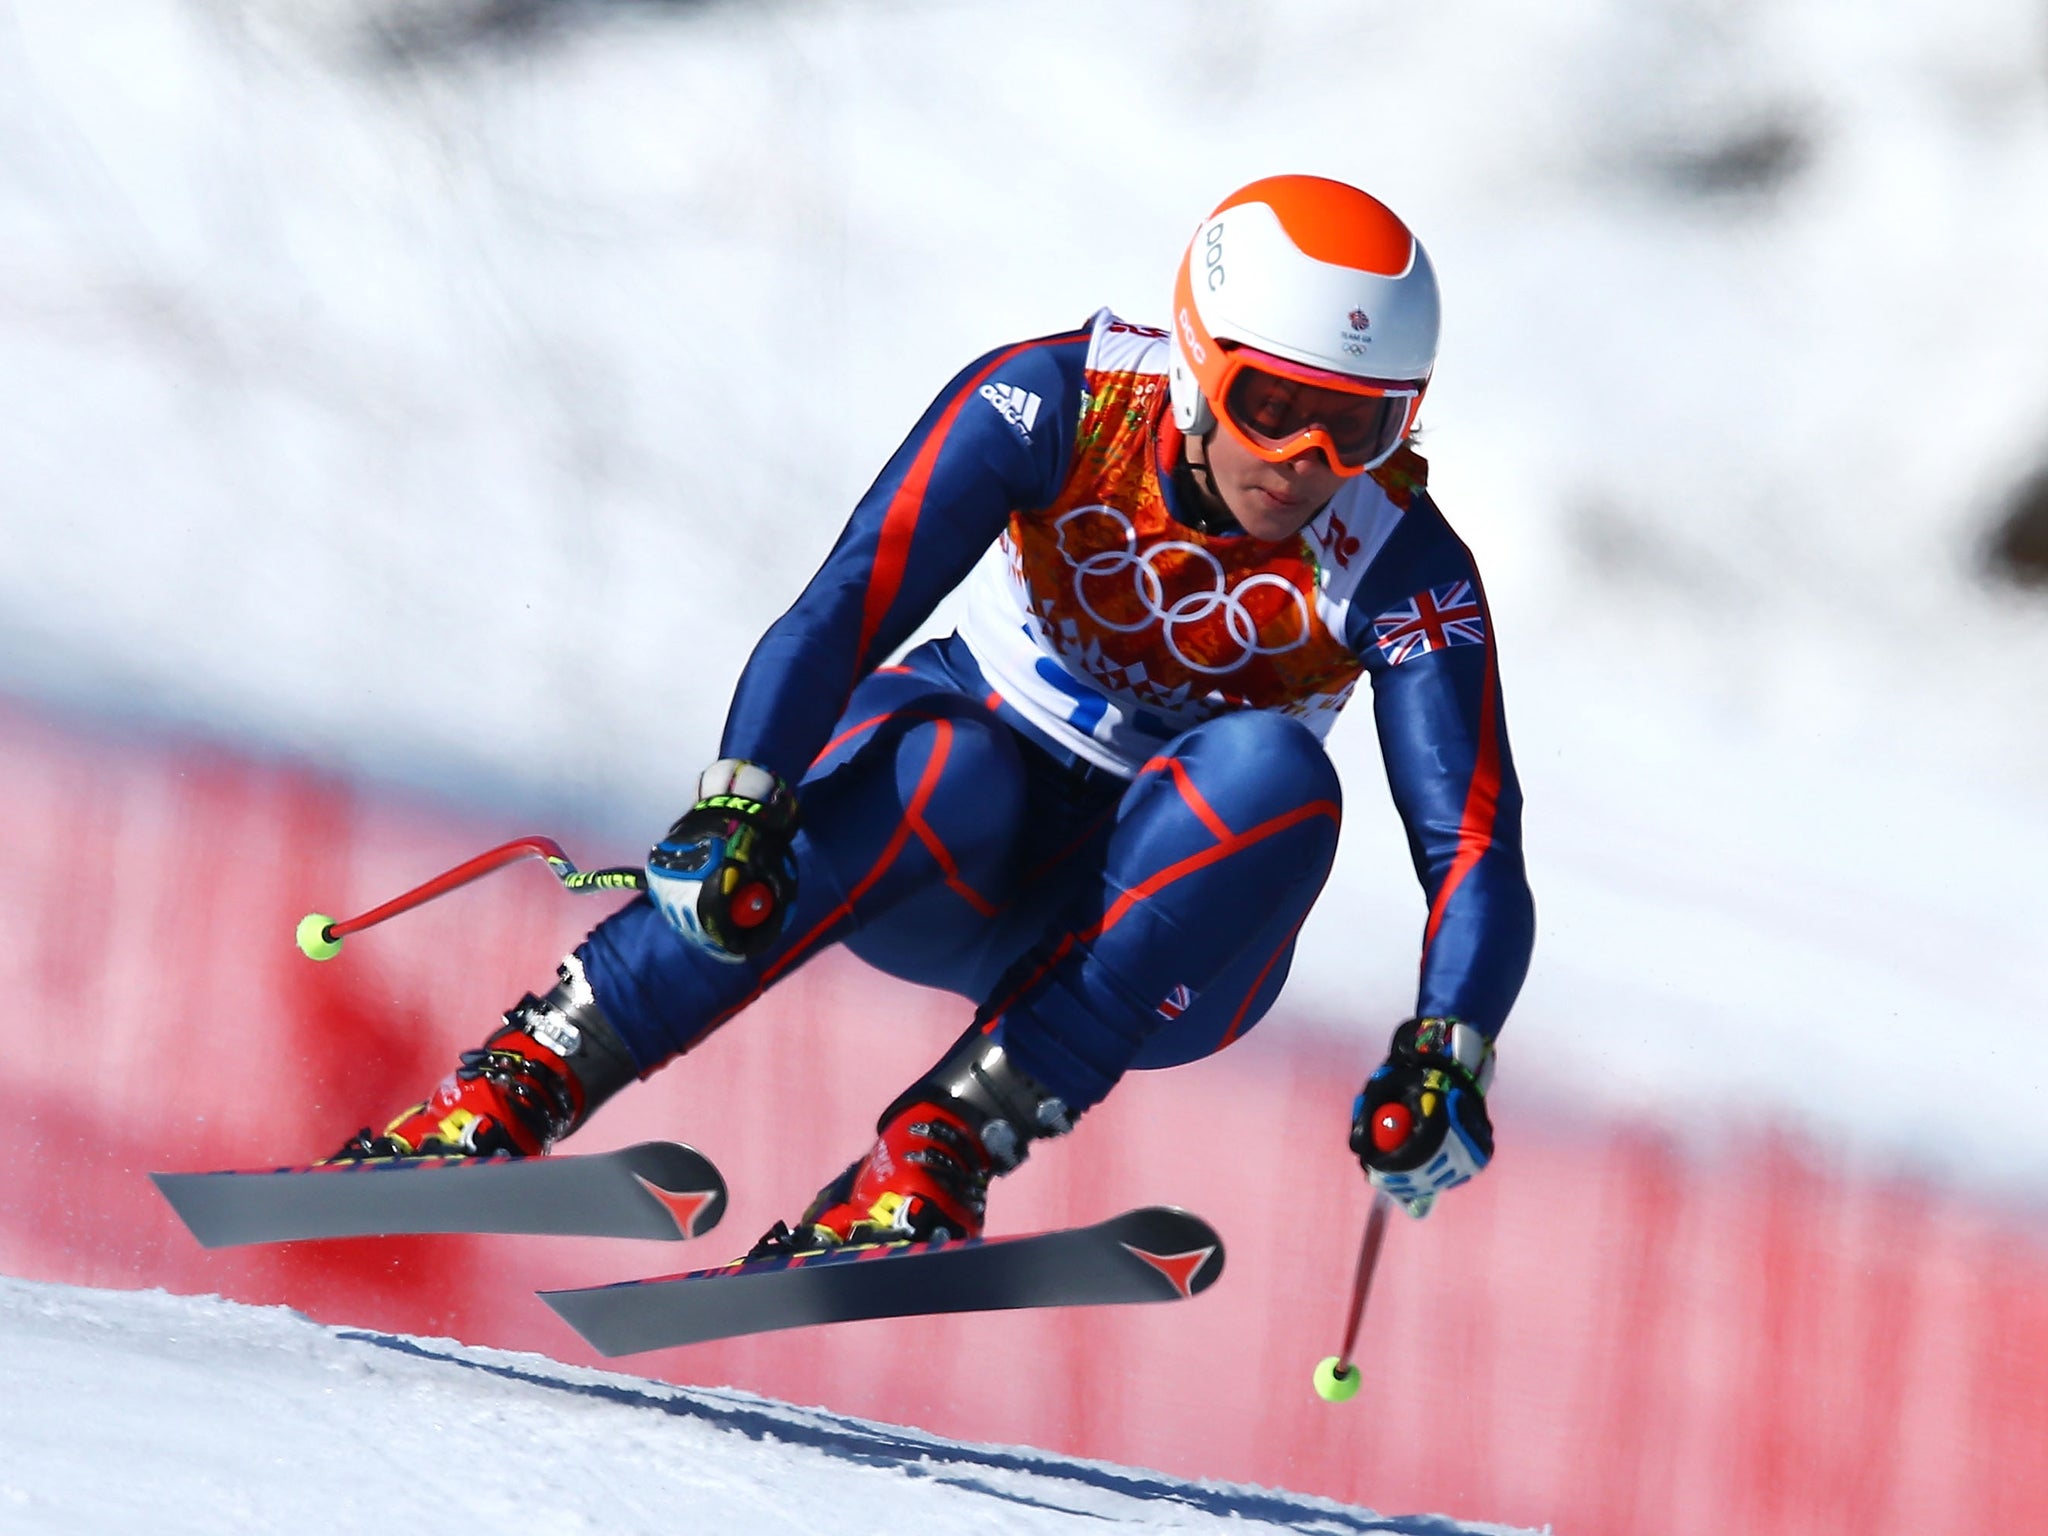 Chemmy Alcott in action in the women's super-g, where she finished 23rd